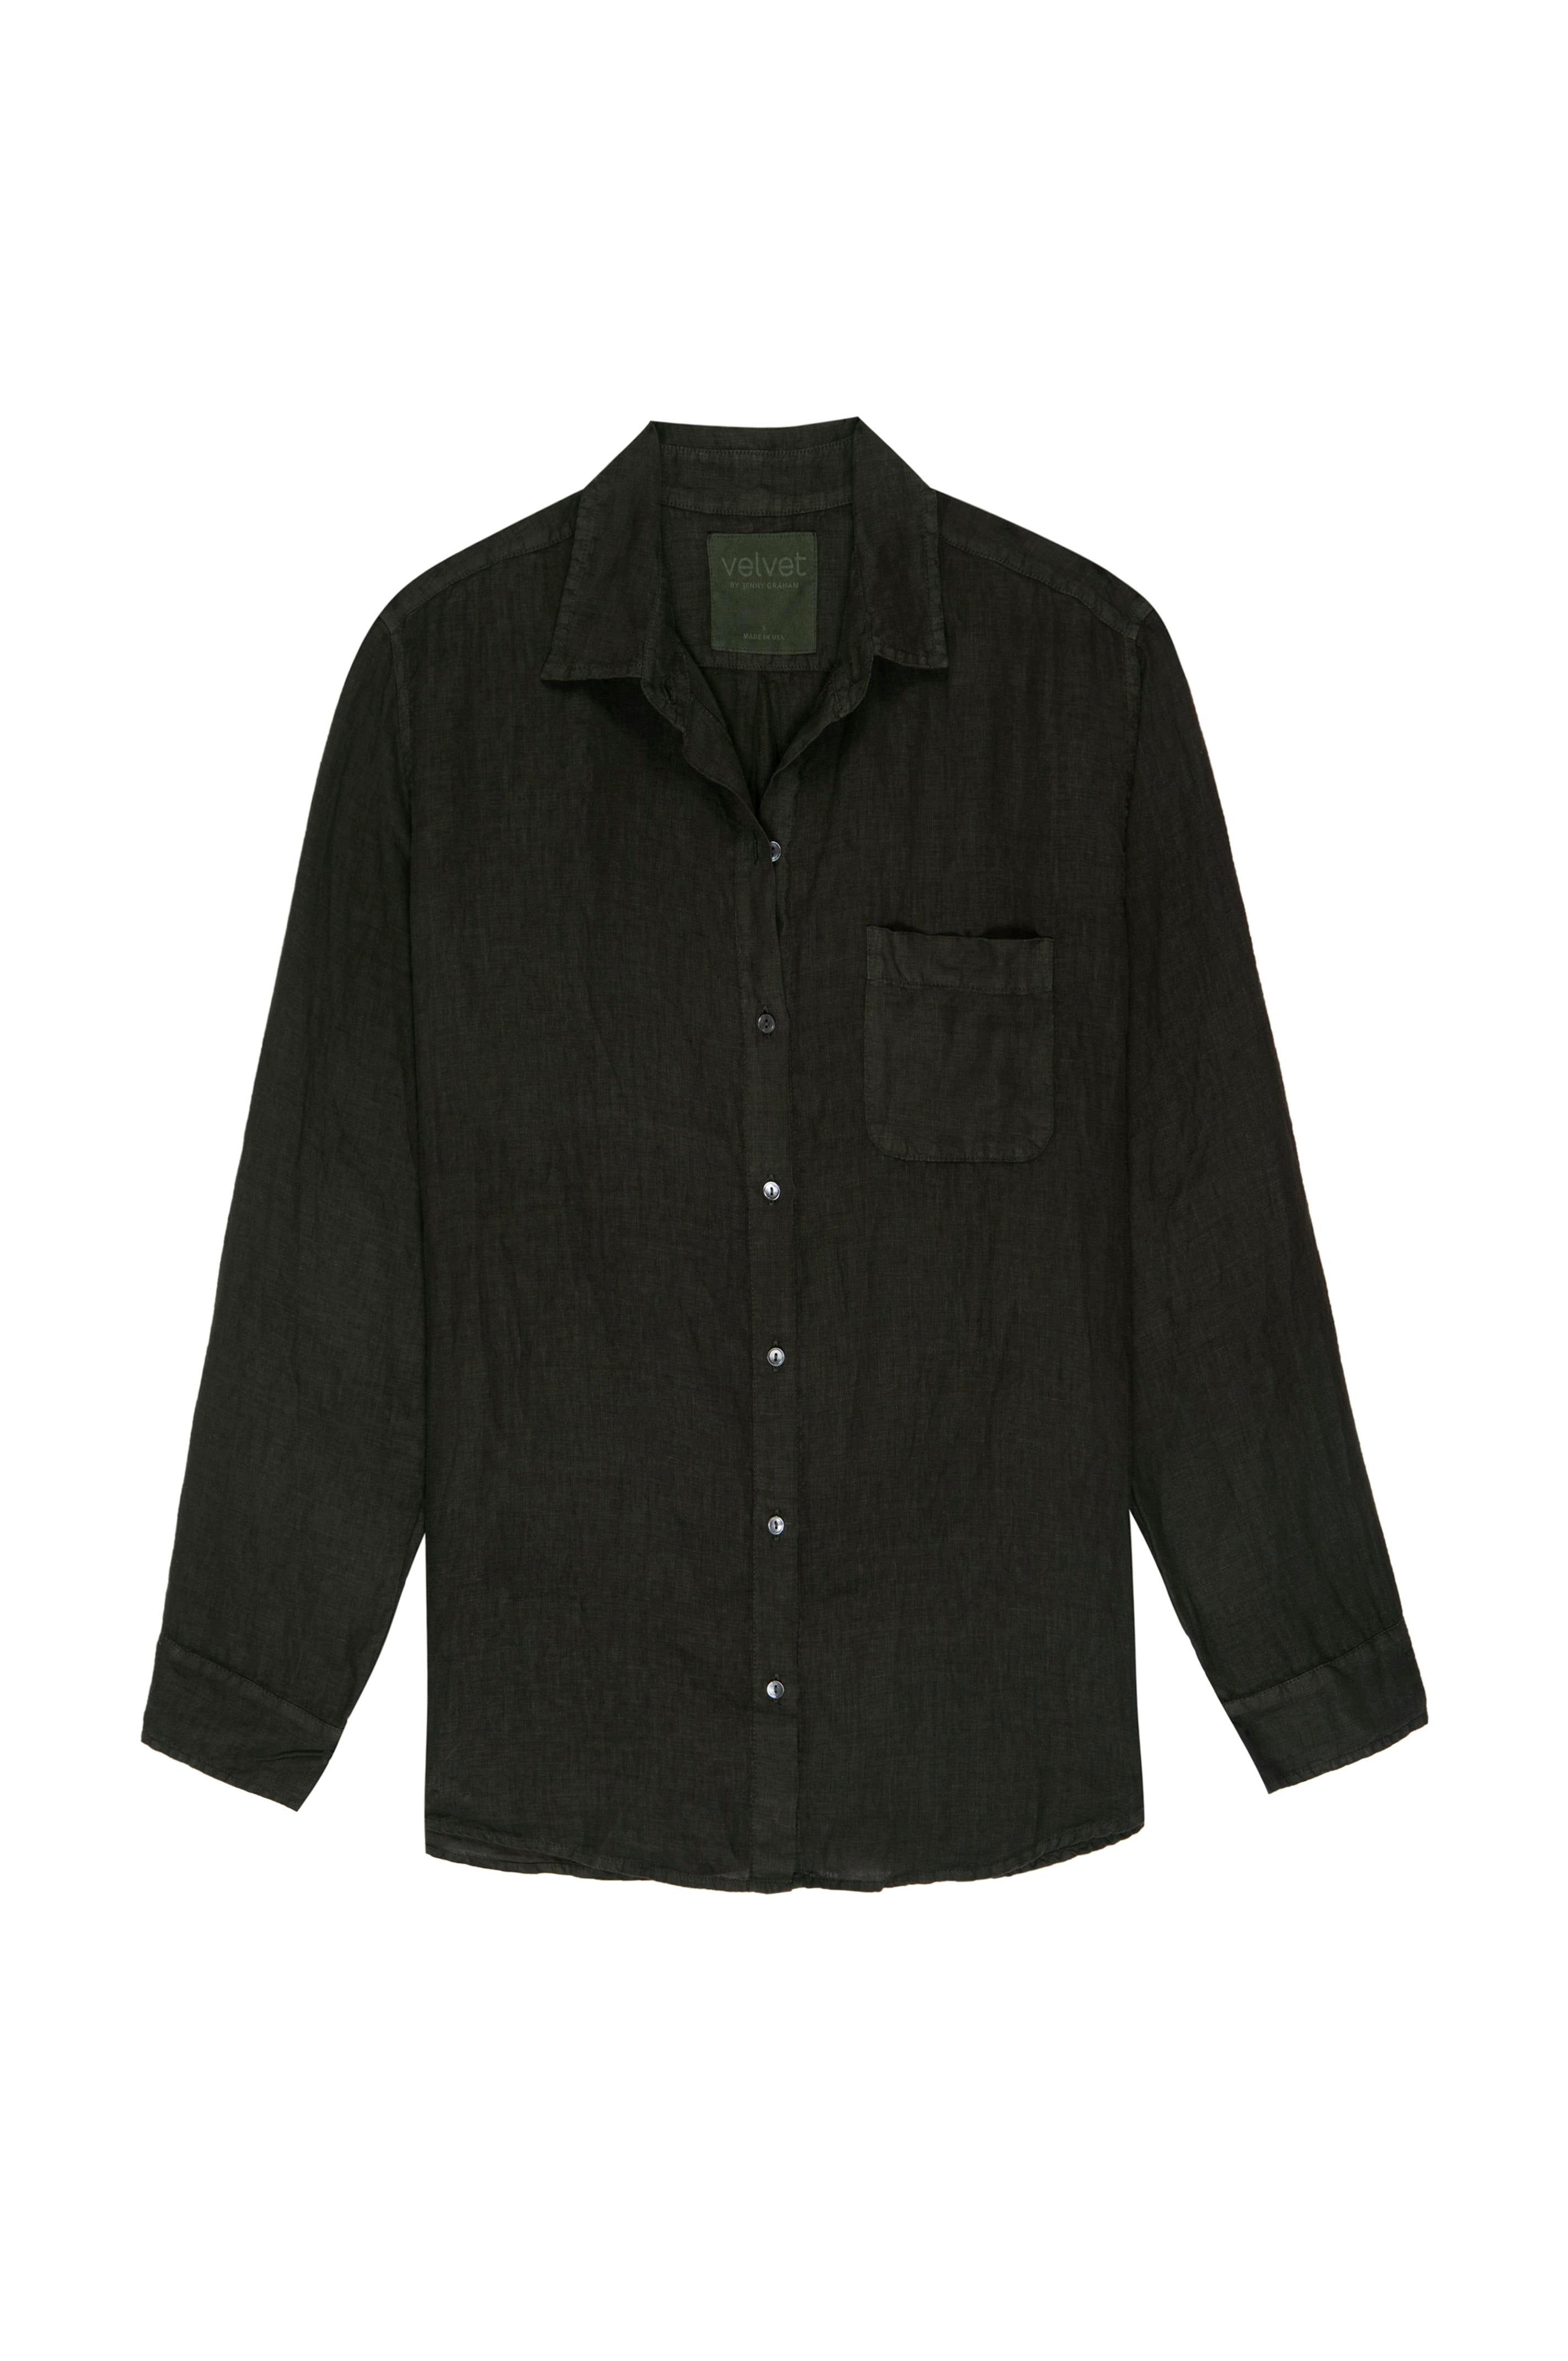   A MULHOLLAND SHIRT by Velvet by Jenny Graham, a black linen button up shirt with a button down collar and relaxed silhouette. 